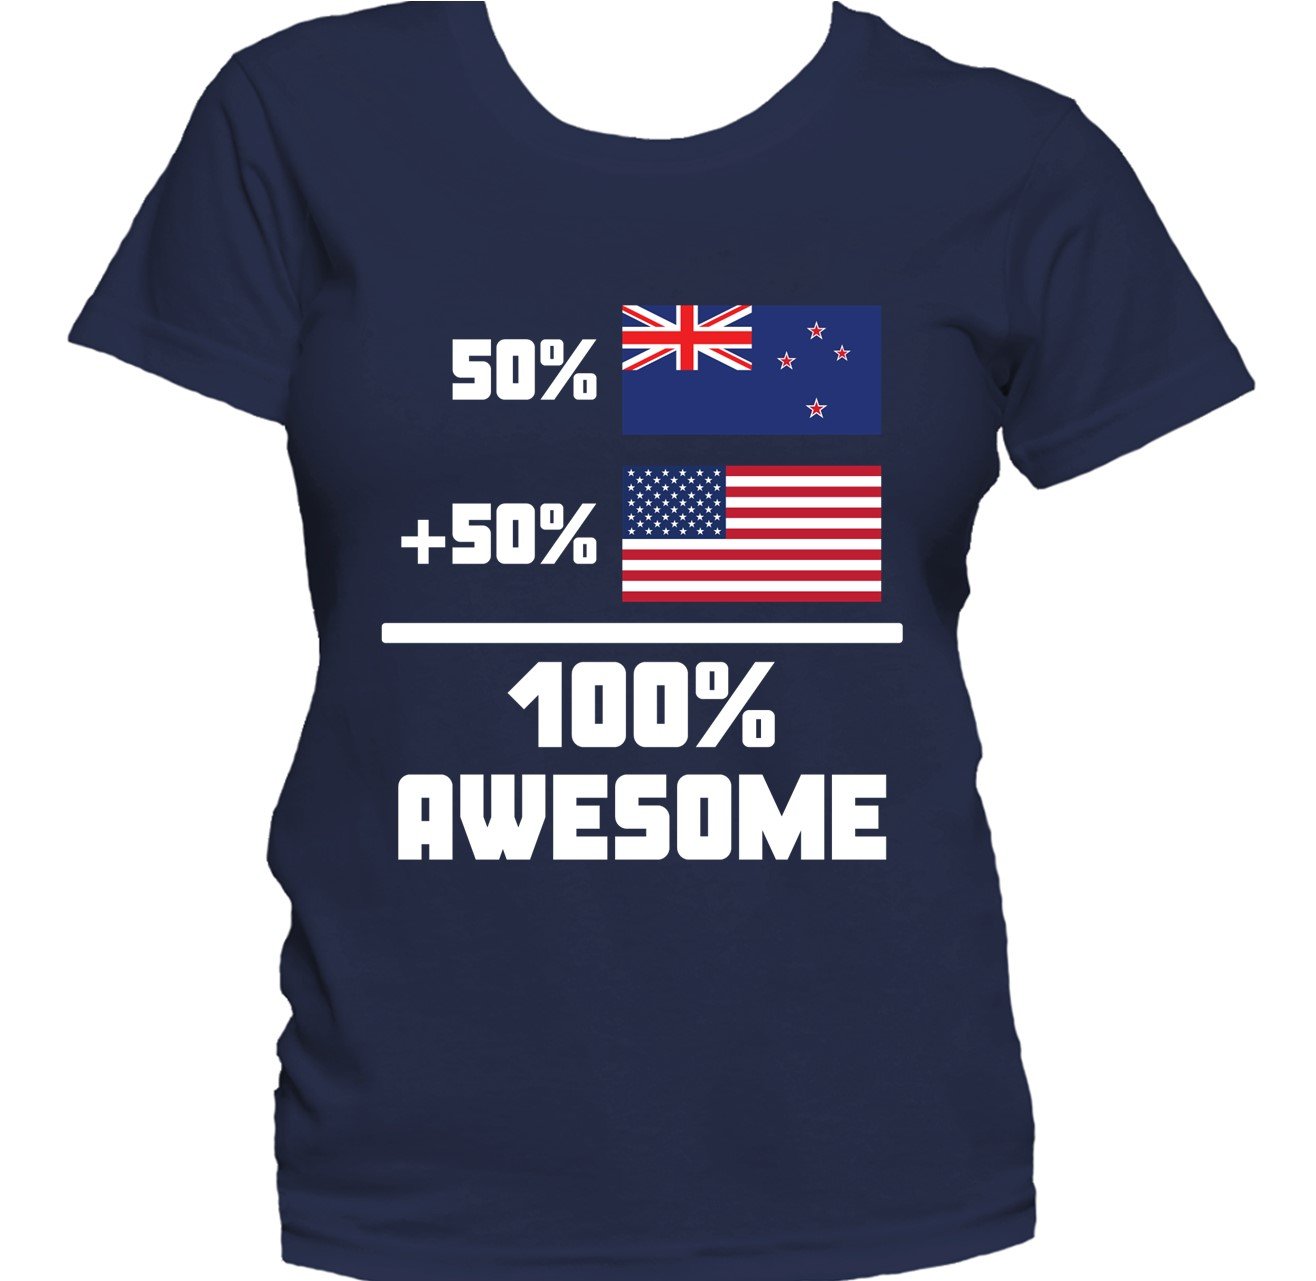 50% New Zealand 50% American 100% Awesome Funny Flag Women's T-Shirt